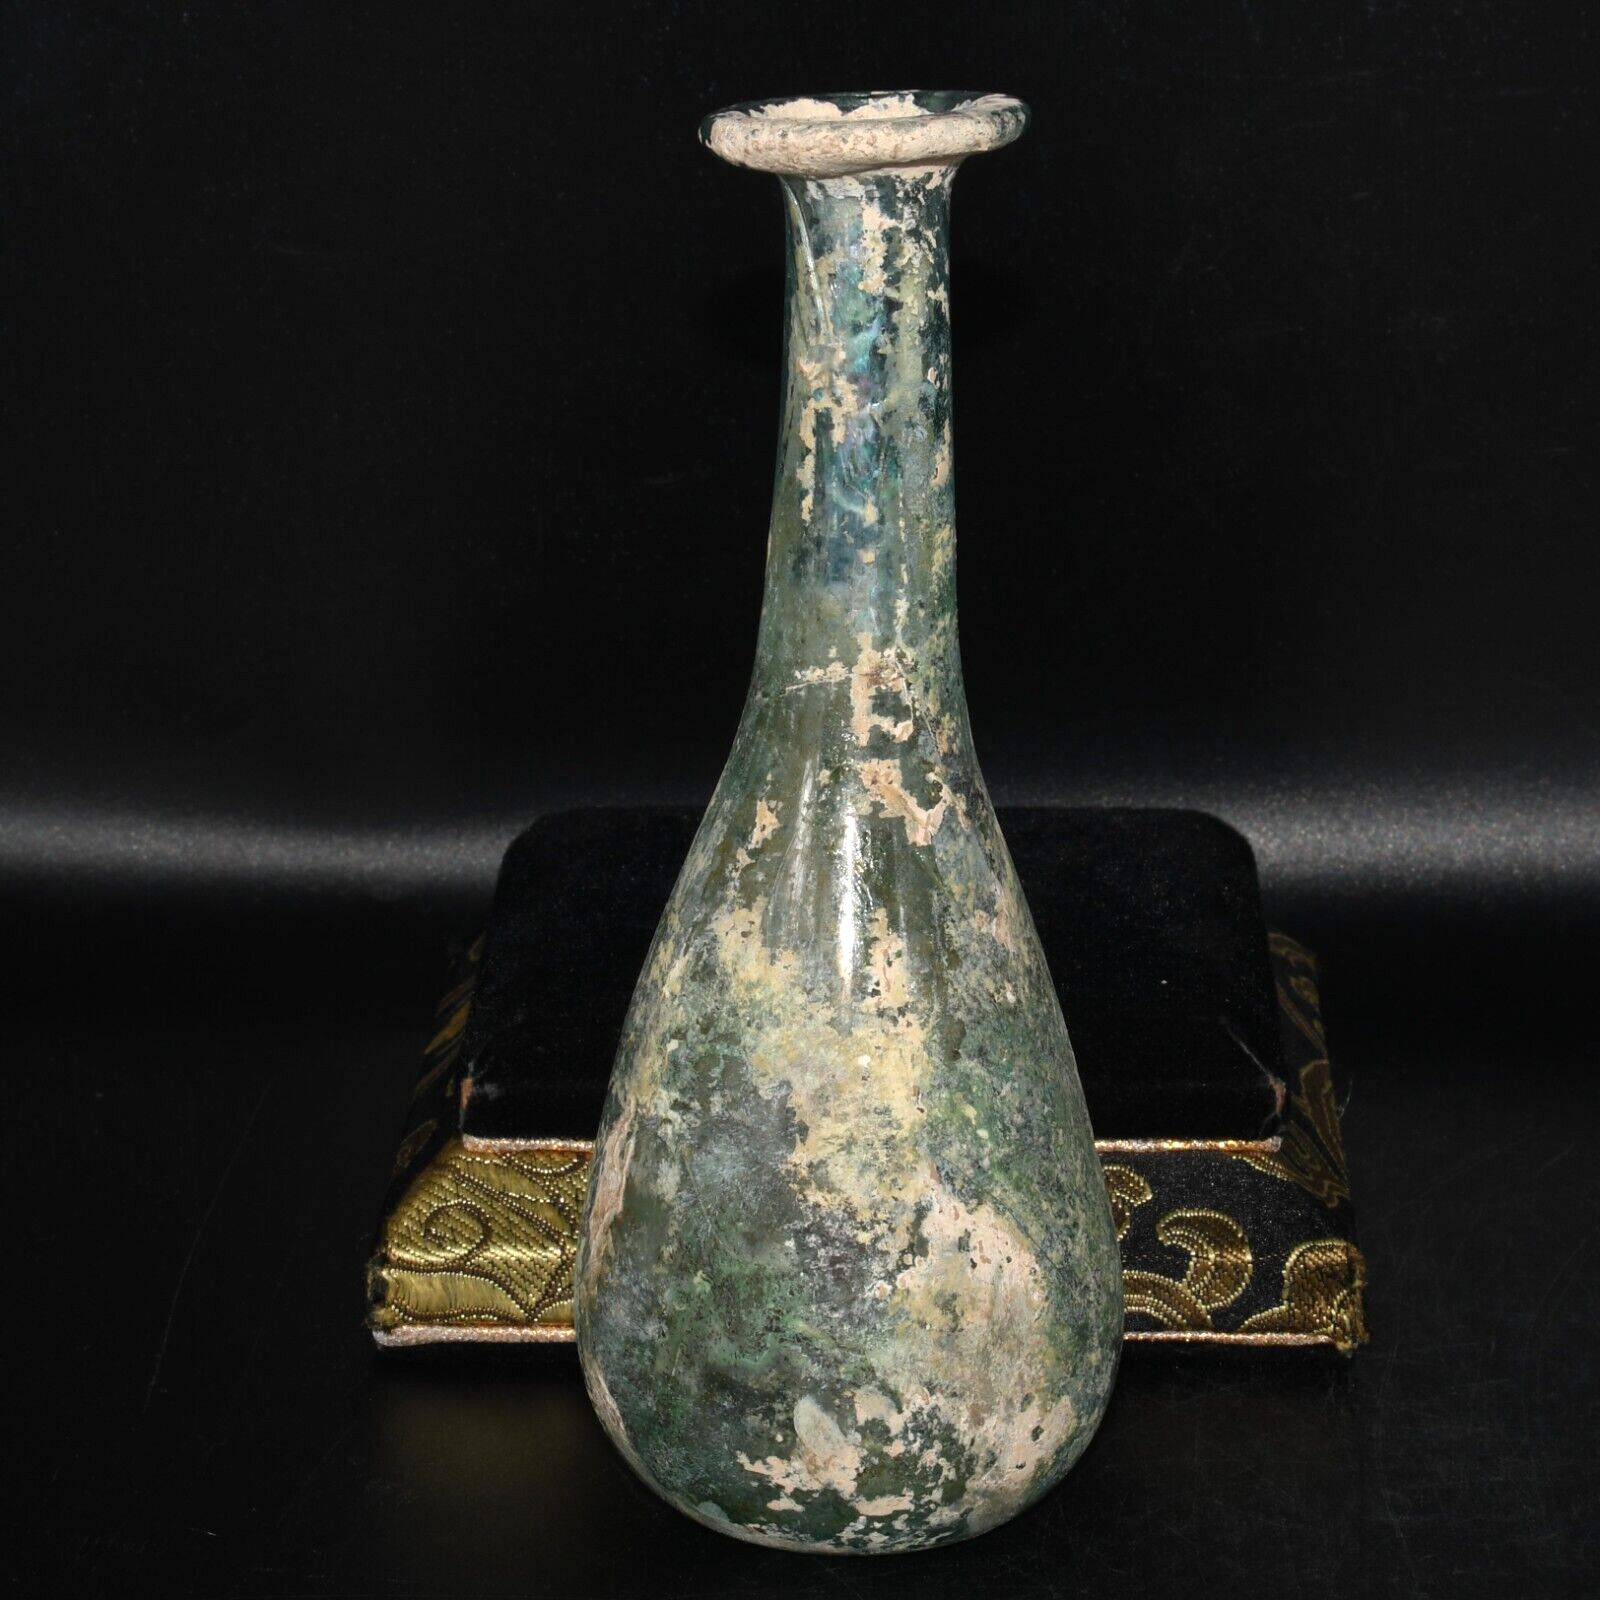 Authentic Ancient Intact Roman Glass Bottle with Long Neck Ca. 3rd - 4th Century